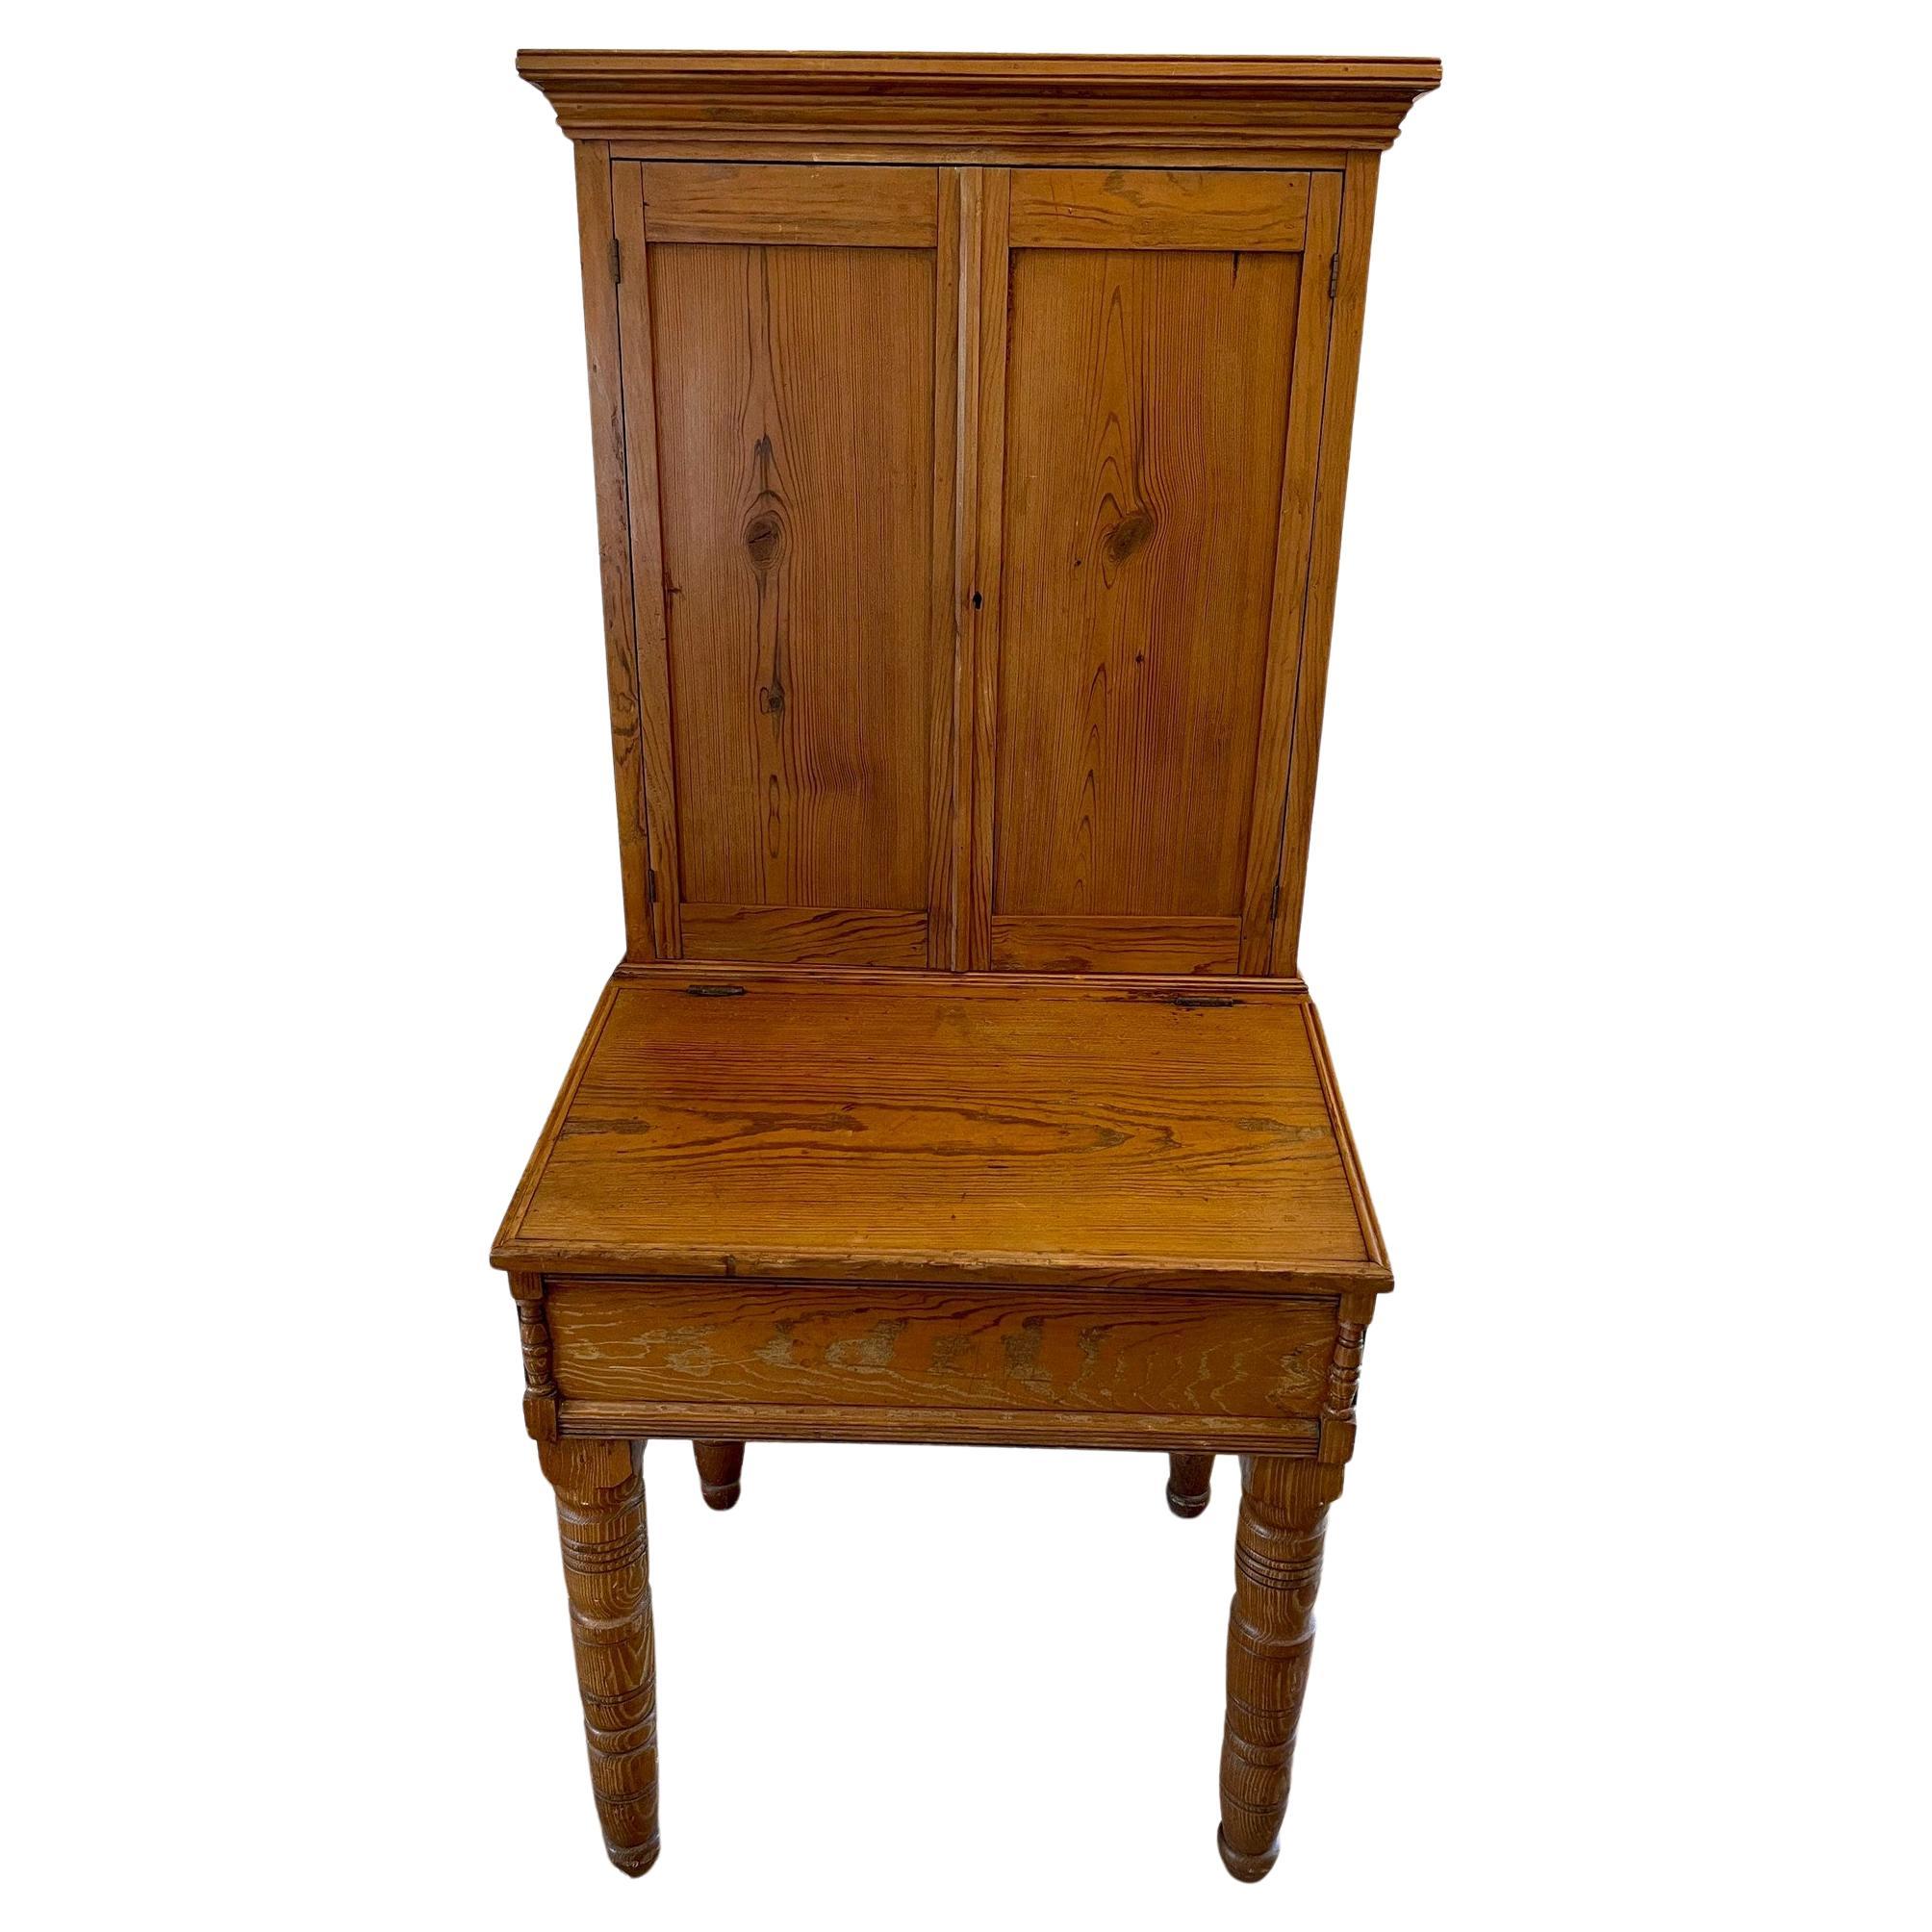 Antique Early American 19th Century Pine Plantation Desk For Sale